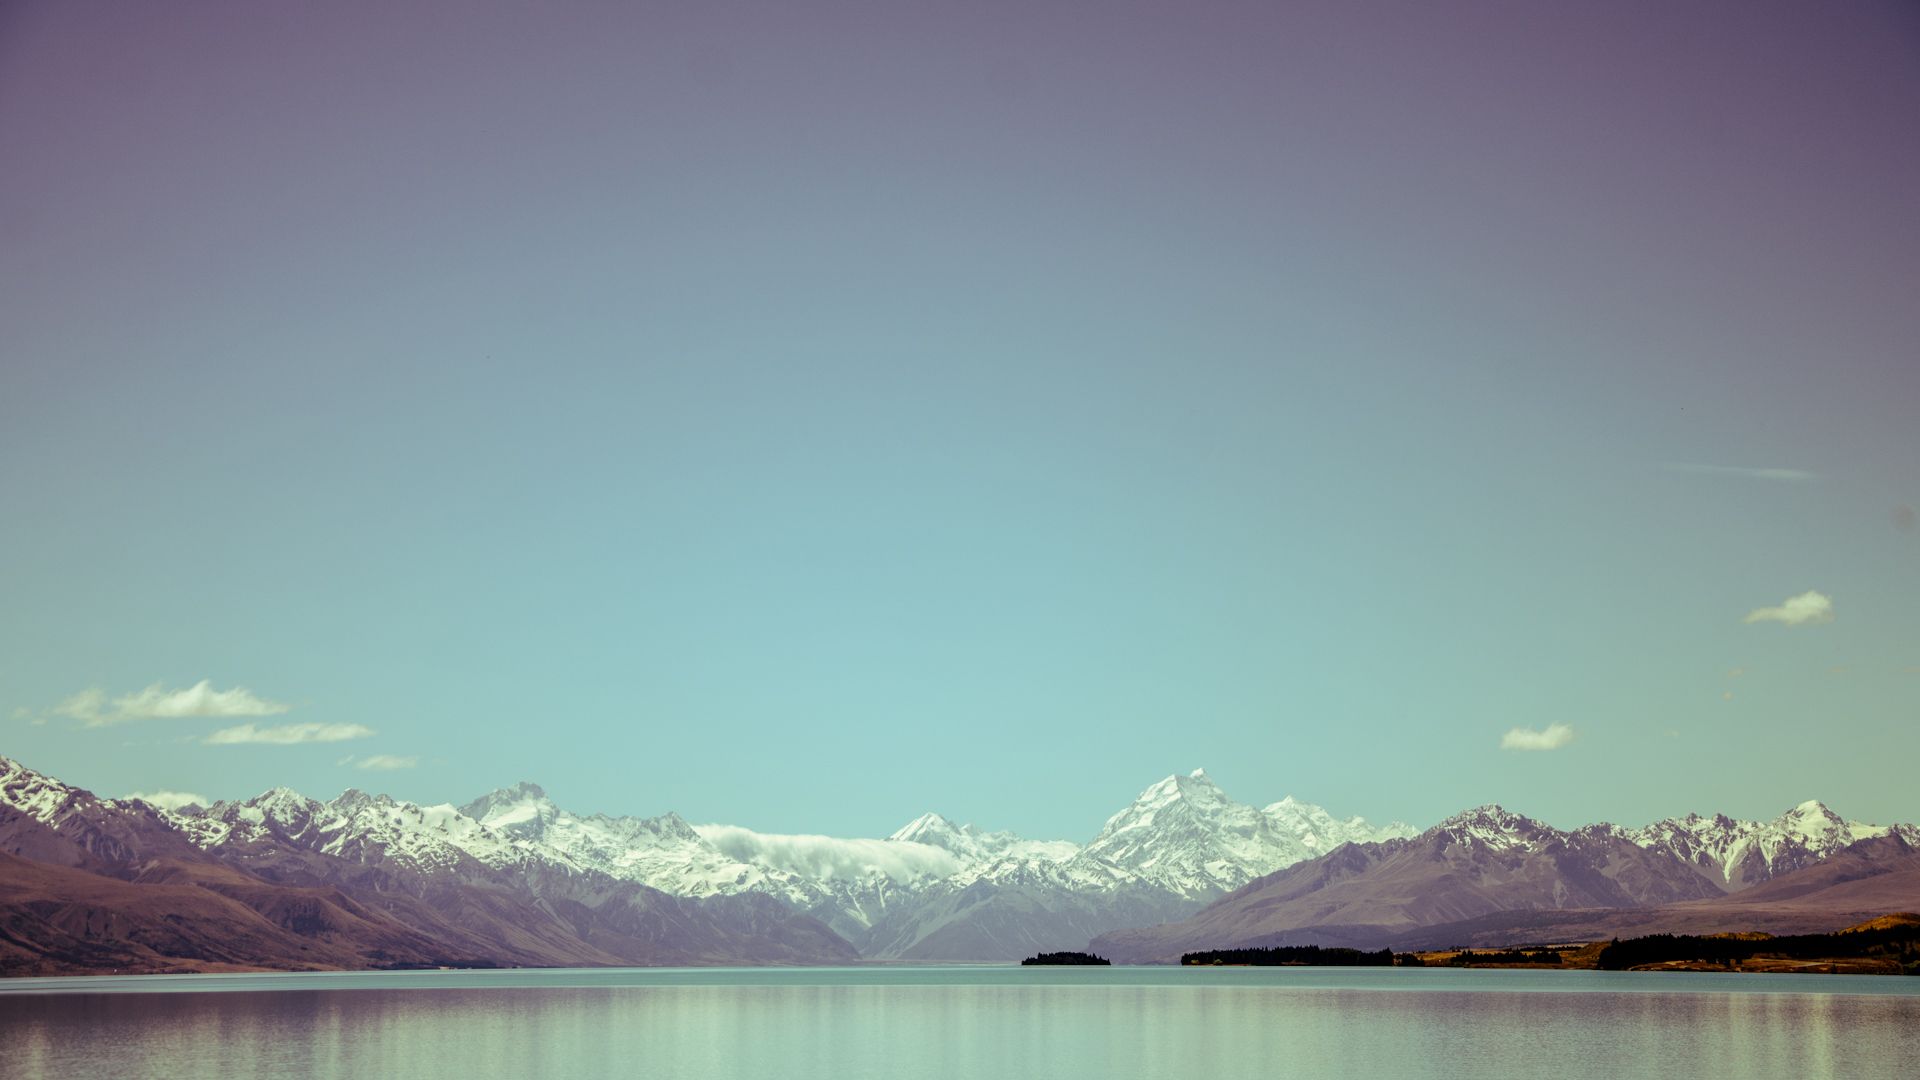 Blue Sky, Snowy Mountains - HD Backgrounds